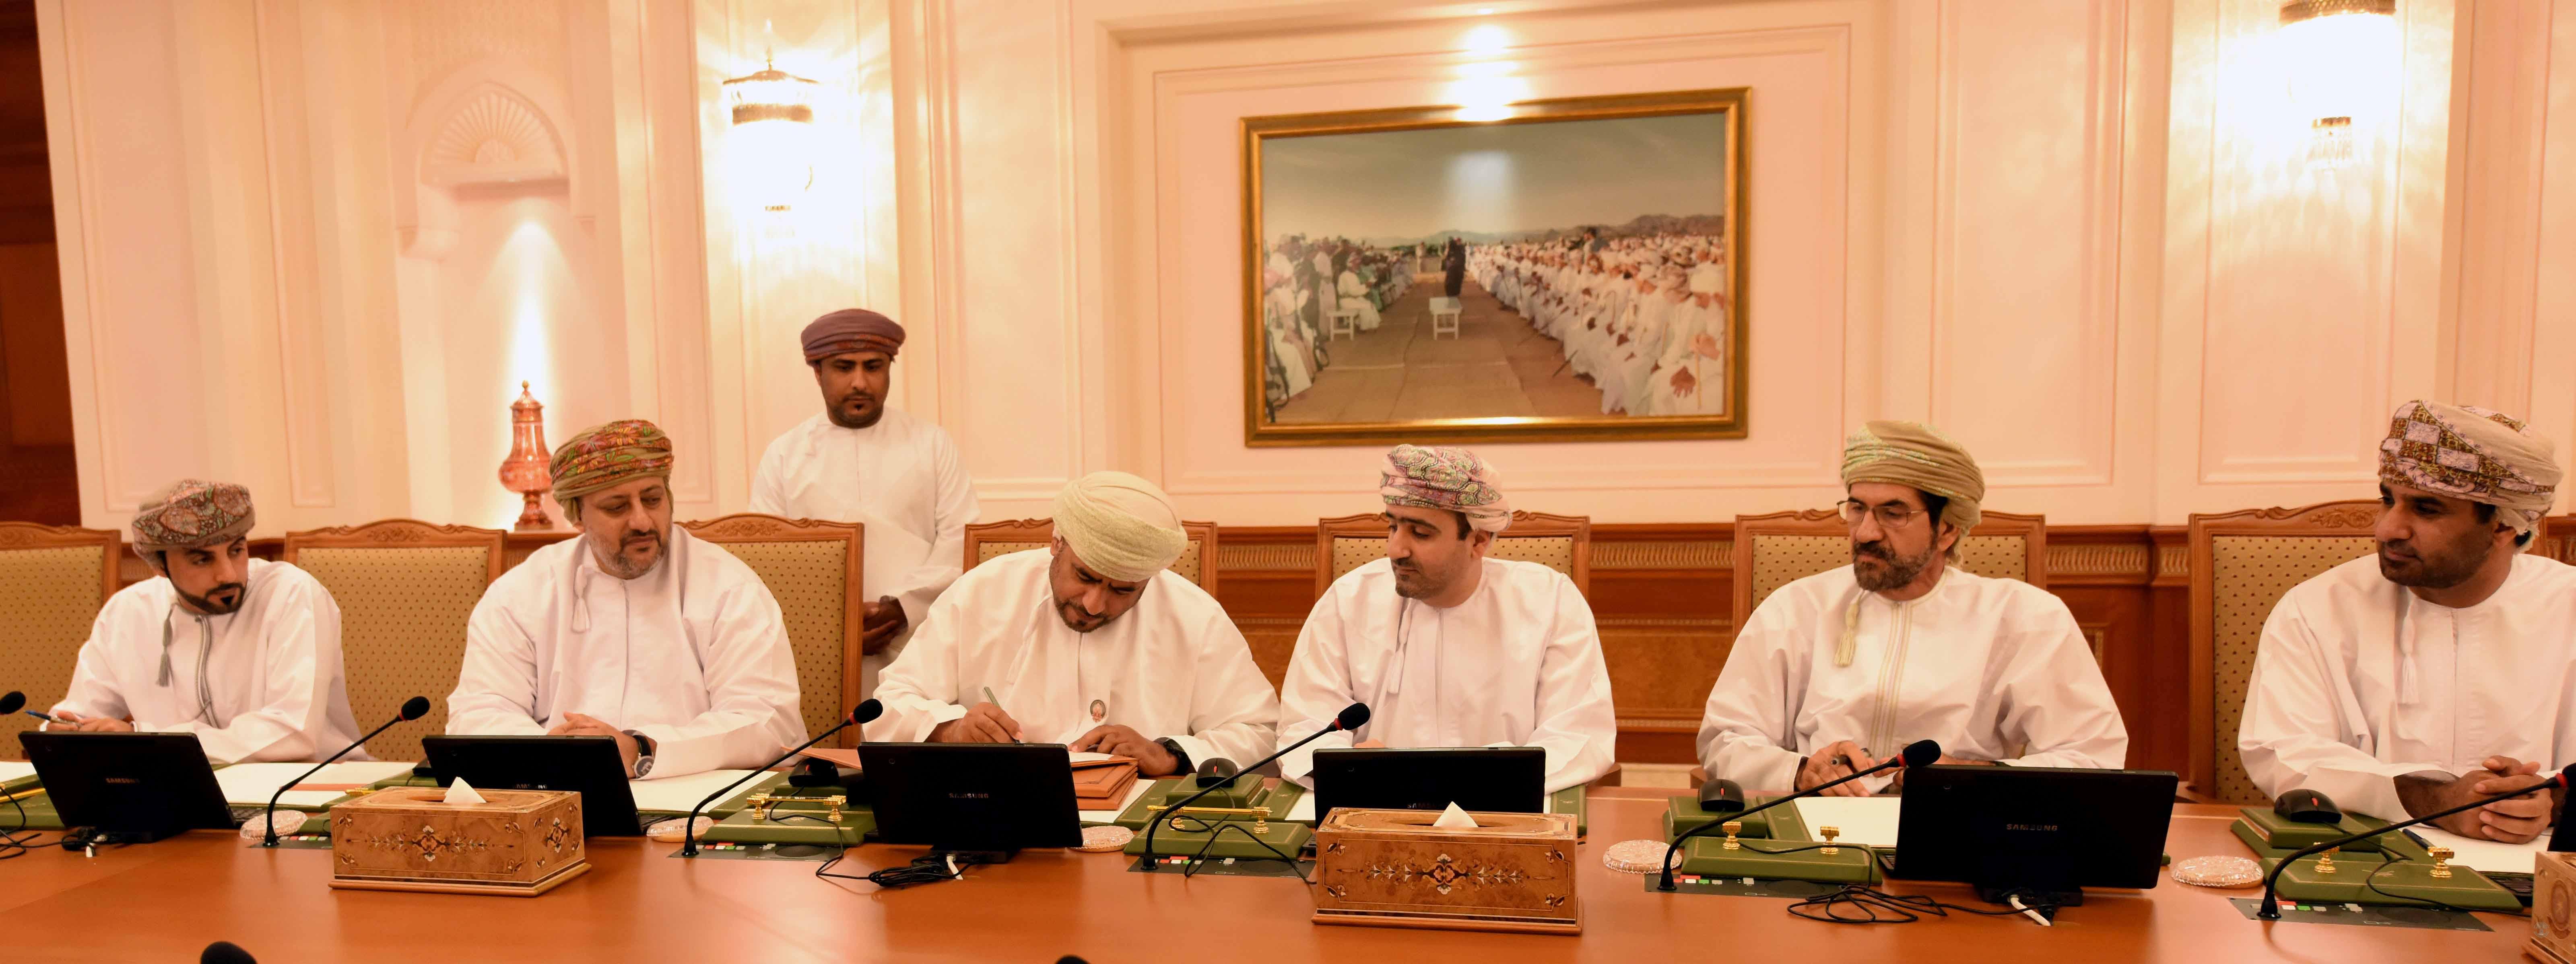 Oman's State Council, Majlis Al Shura sign pact for developing training courses